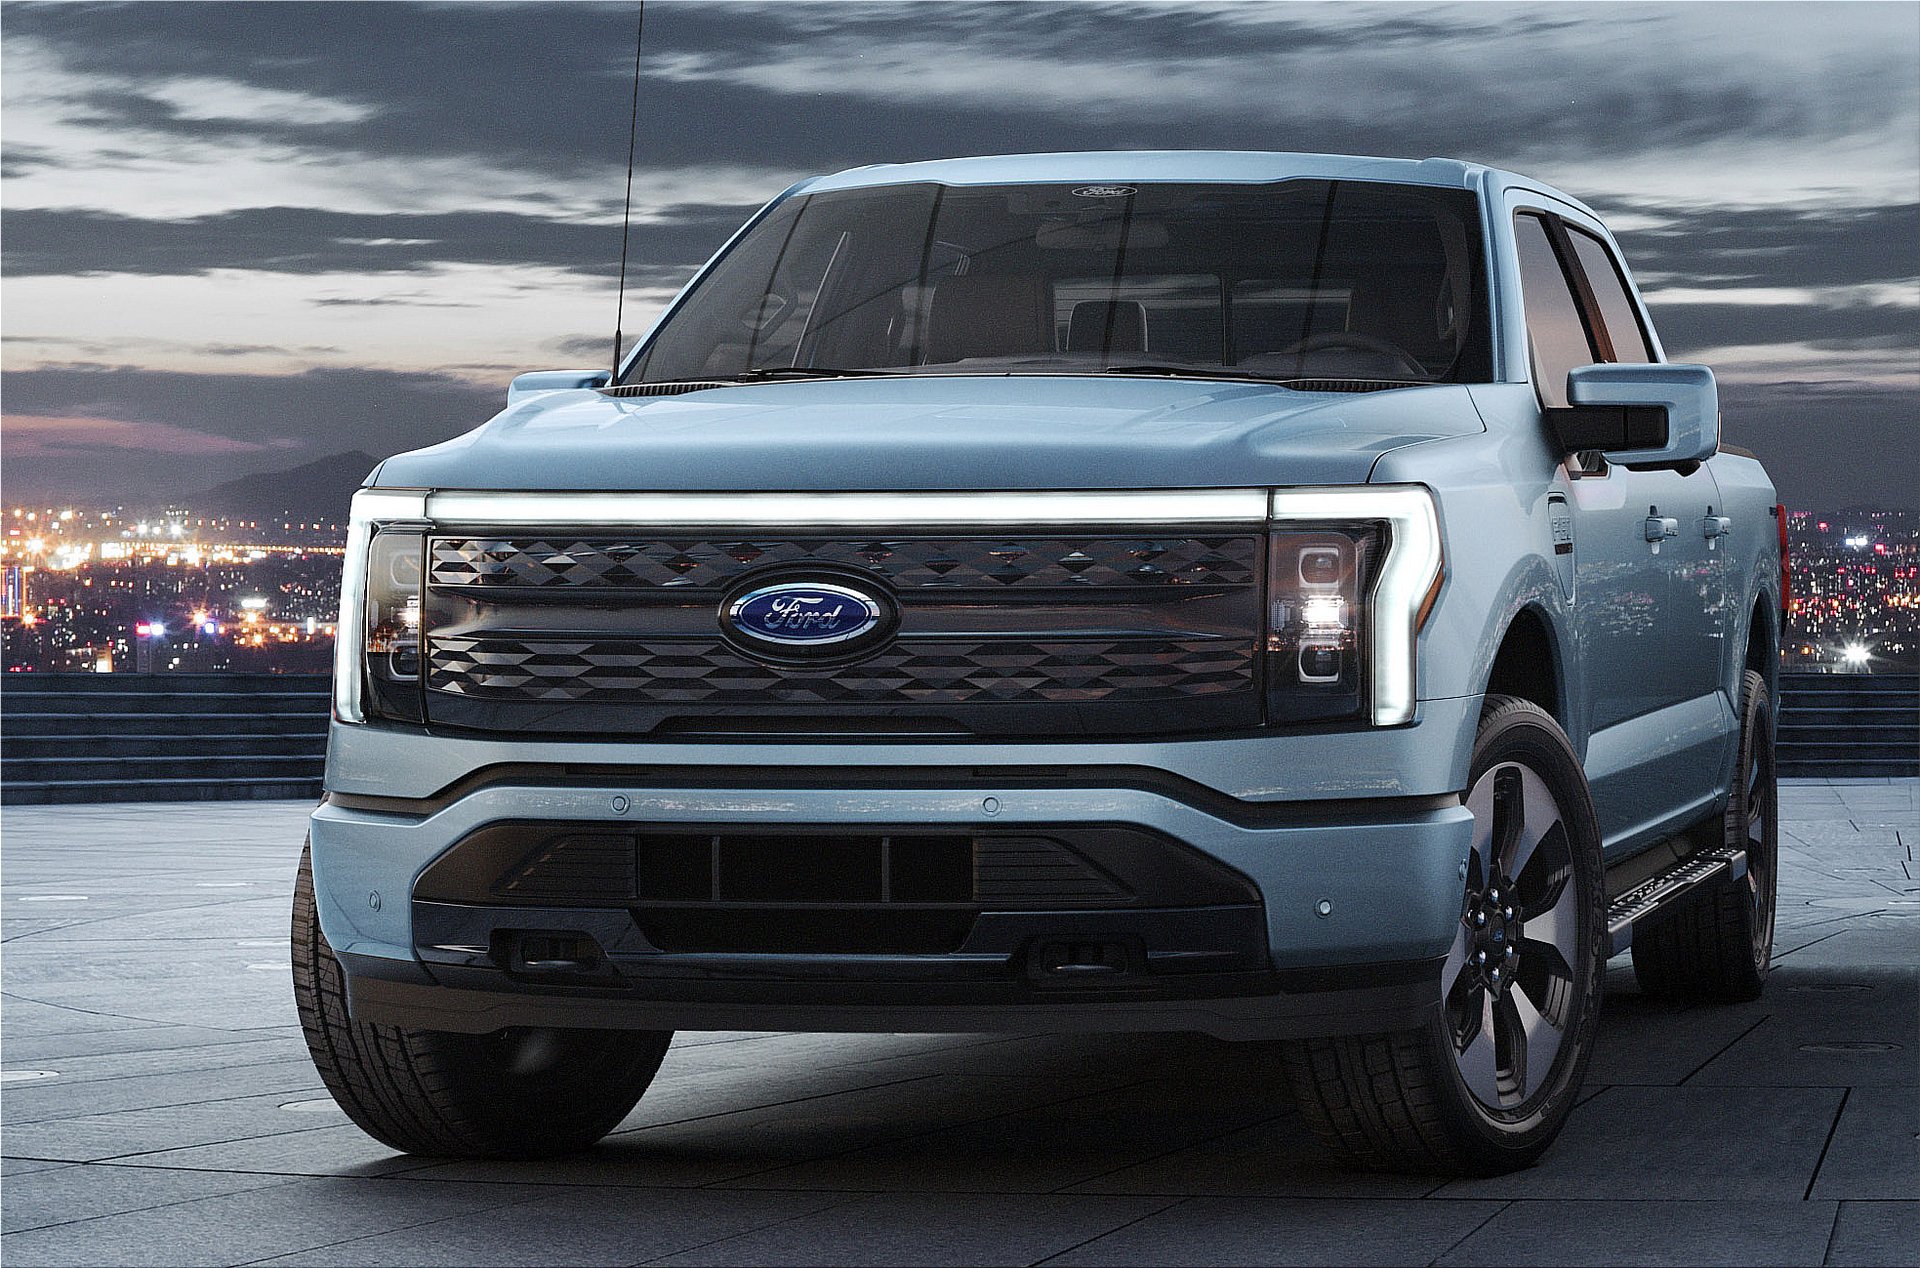 The new Ford F150 Lightning fully electric pickup from 39,000